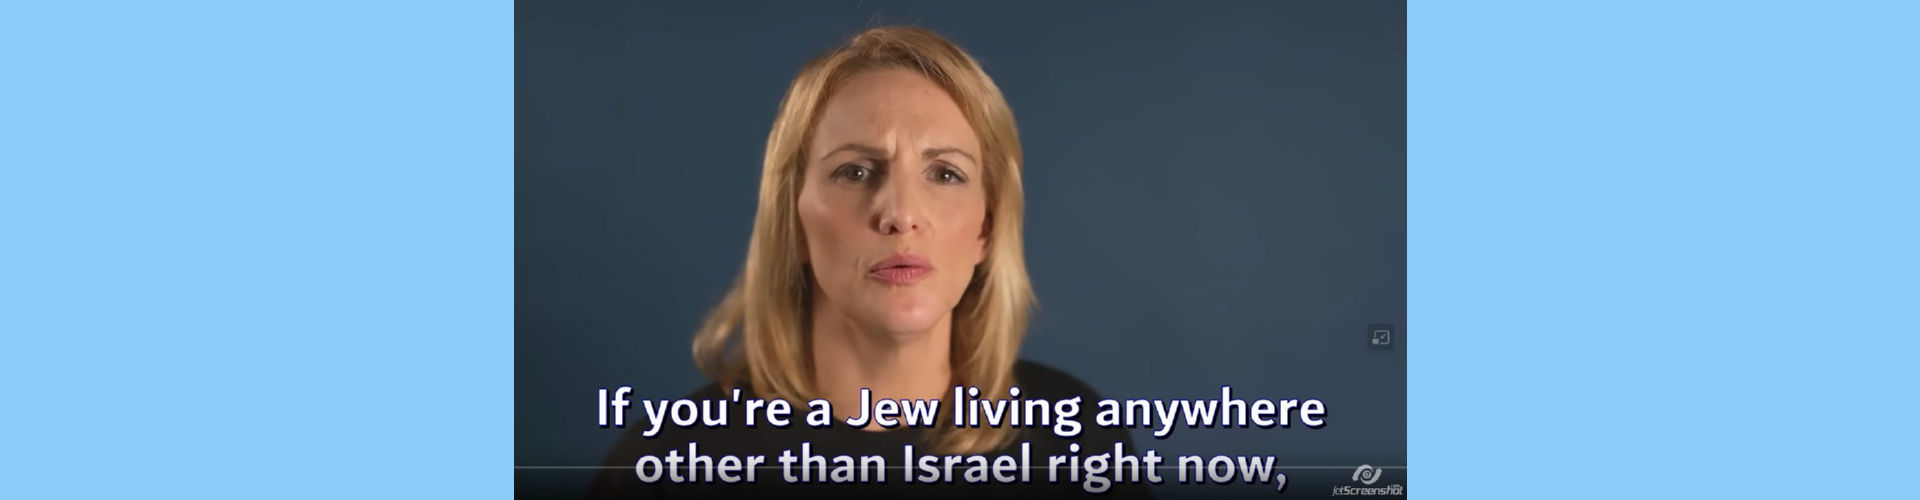 The ground beneath our feet is burning! Watch this heartfelt message to our brothers and sisters around the world: Please Join the Fight for Israeli Democracy. Mika Almog is an Israeli writer, journalist, and political activist. She is also the granddaughter of the late Shimon Peres. Video dated April 21, 2023.